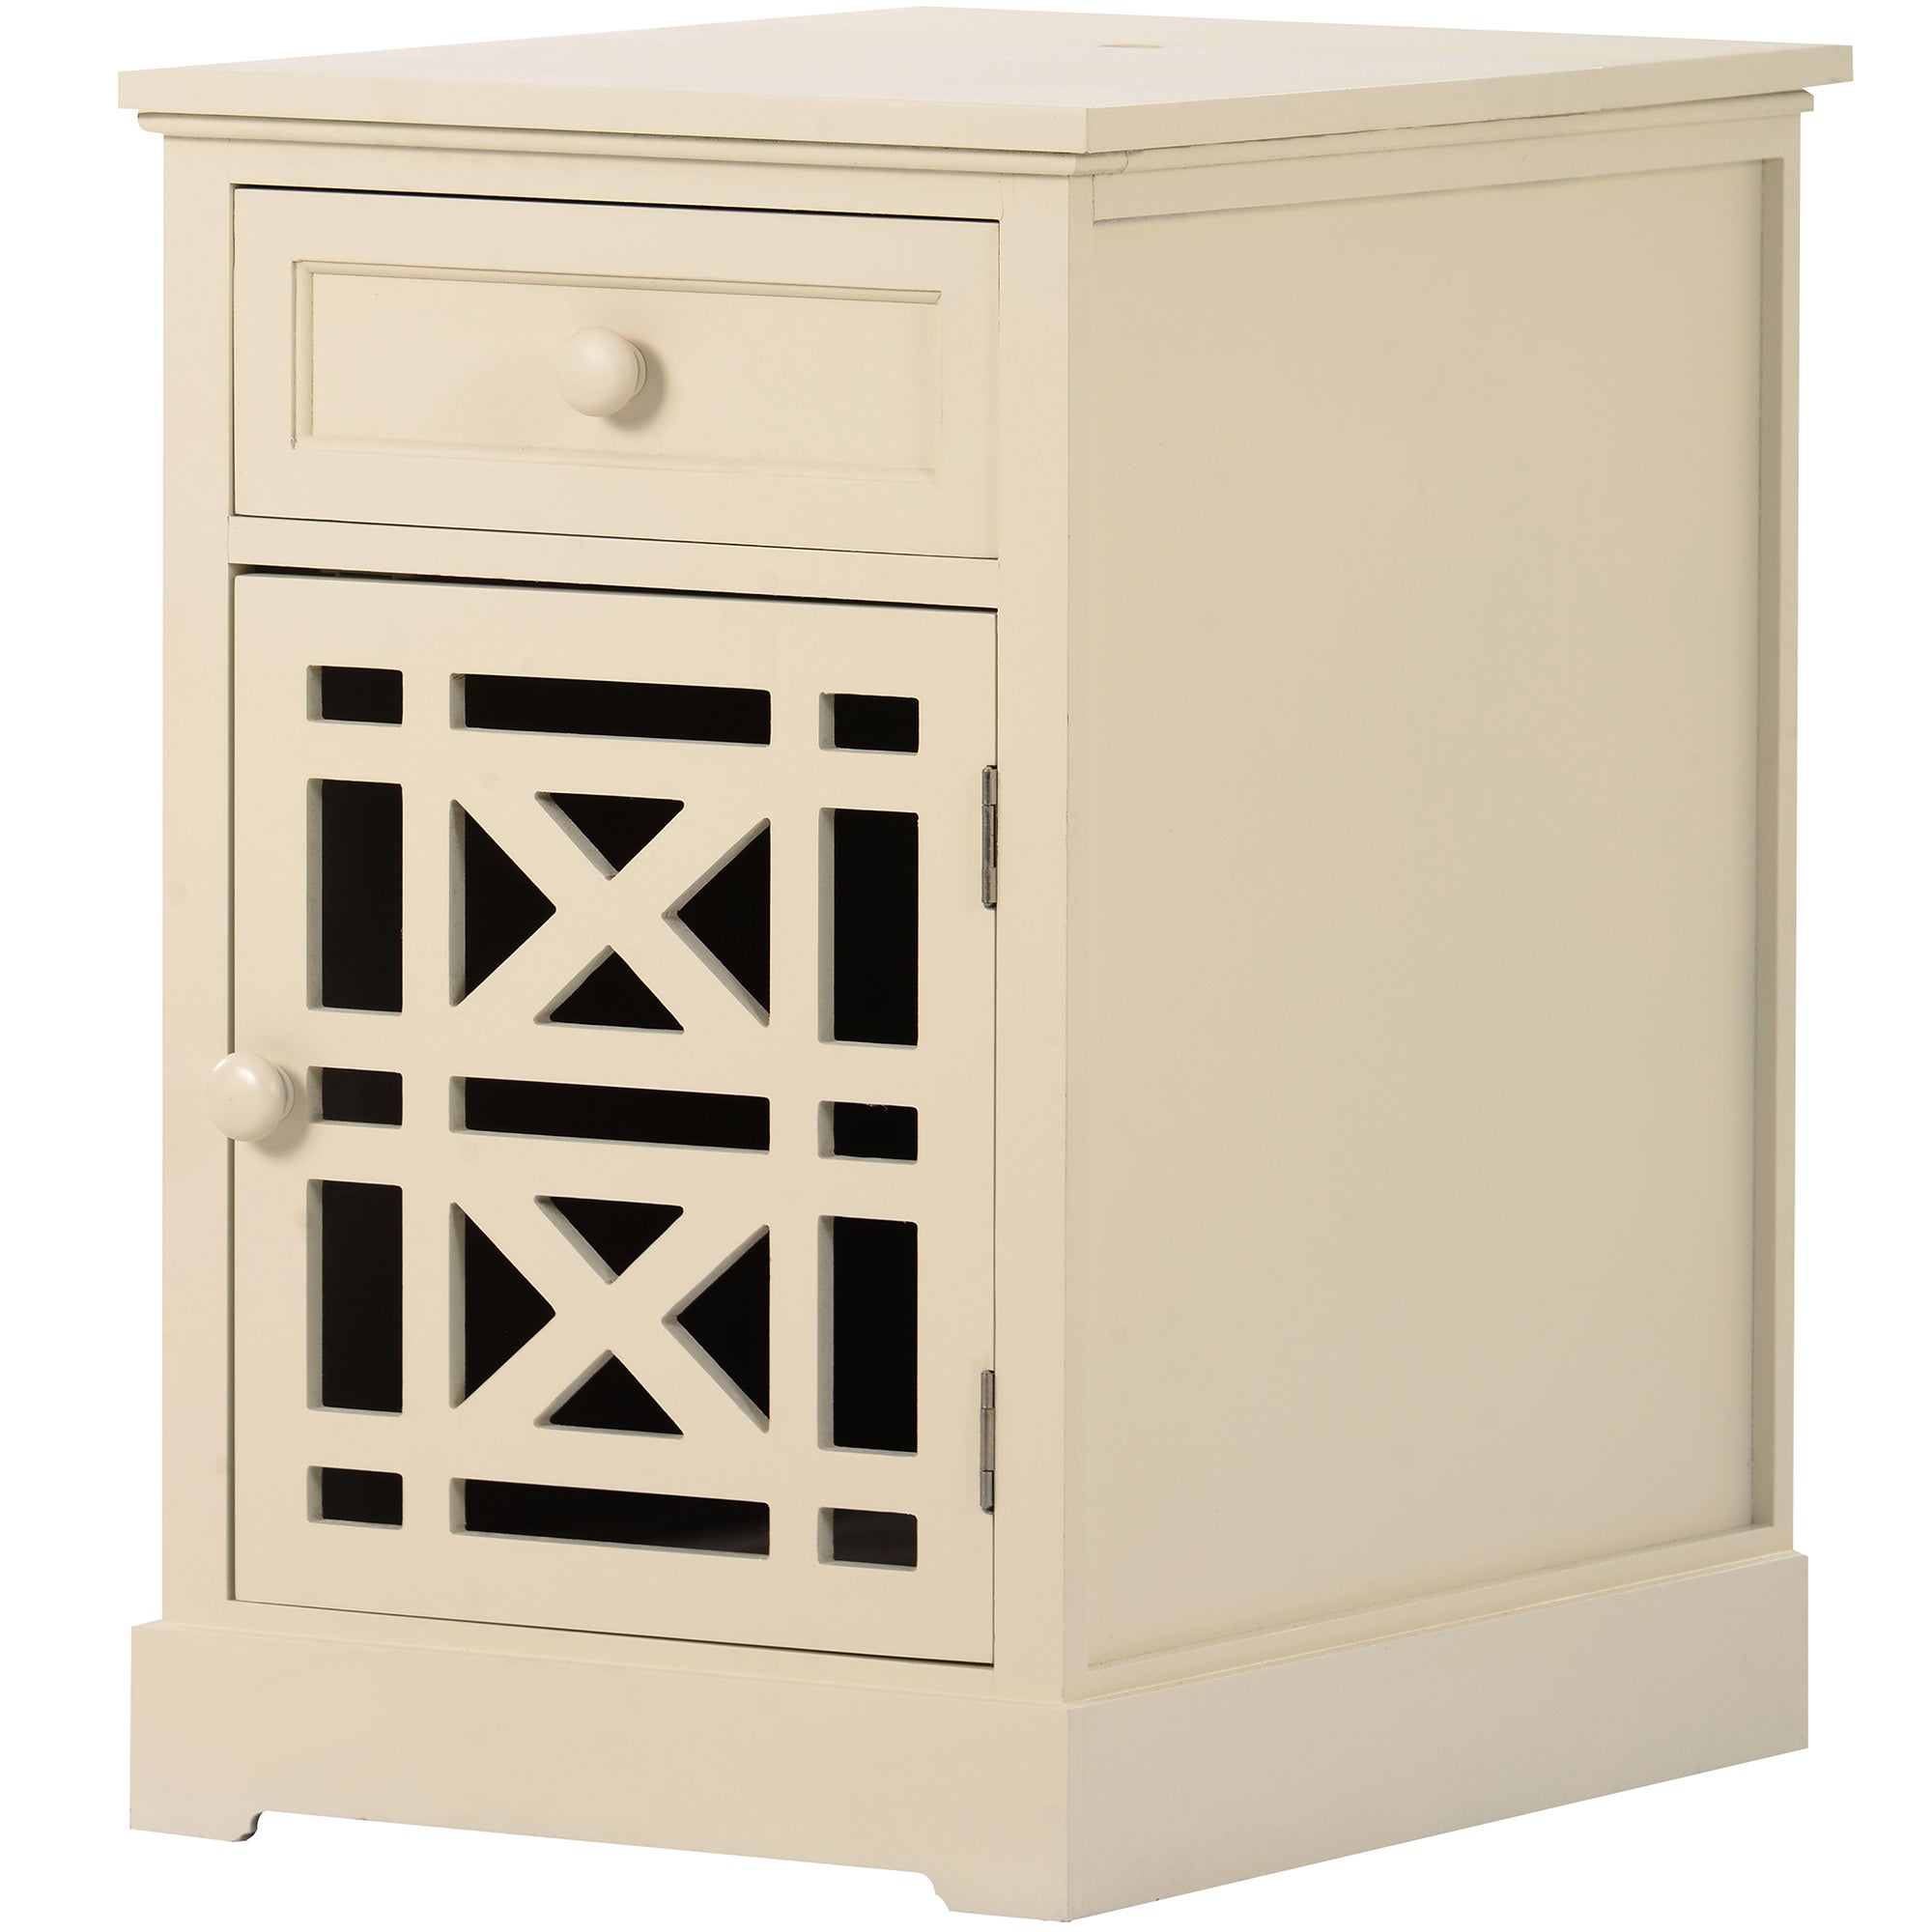 1-Drawer Solid Wood End Table with USB Port